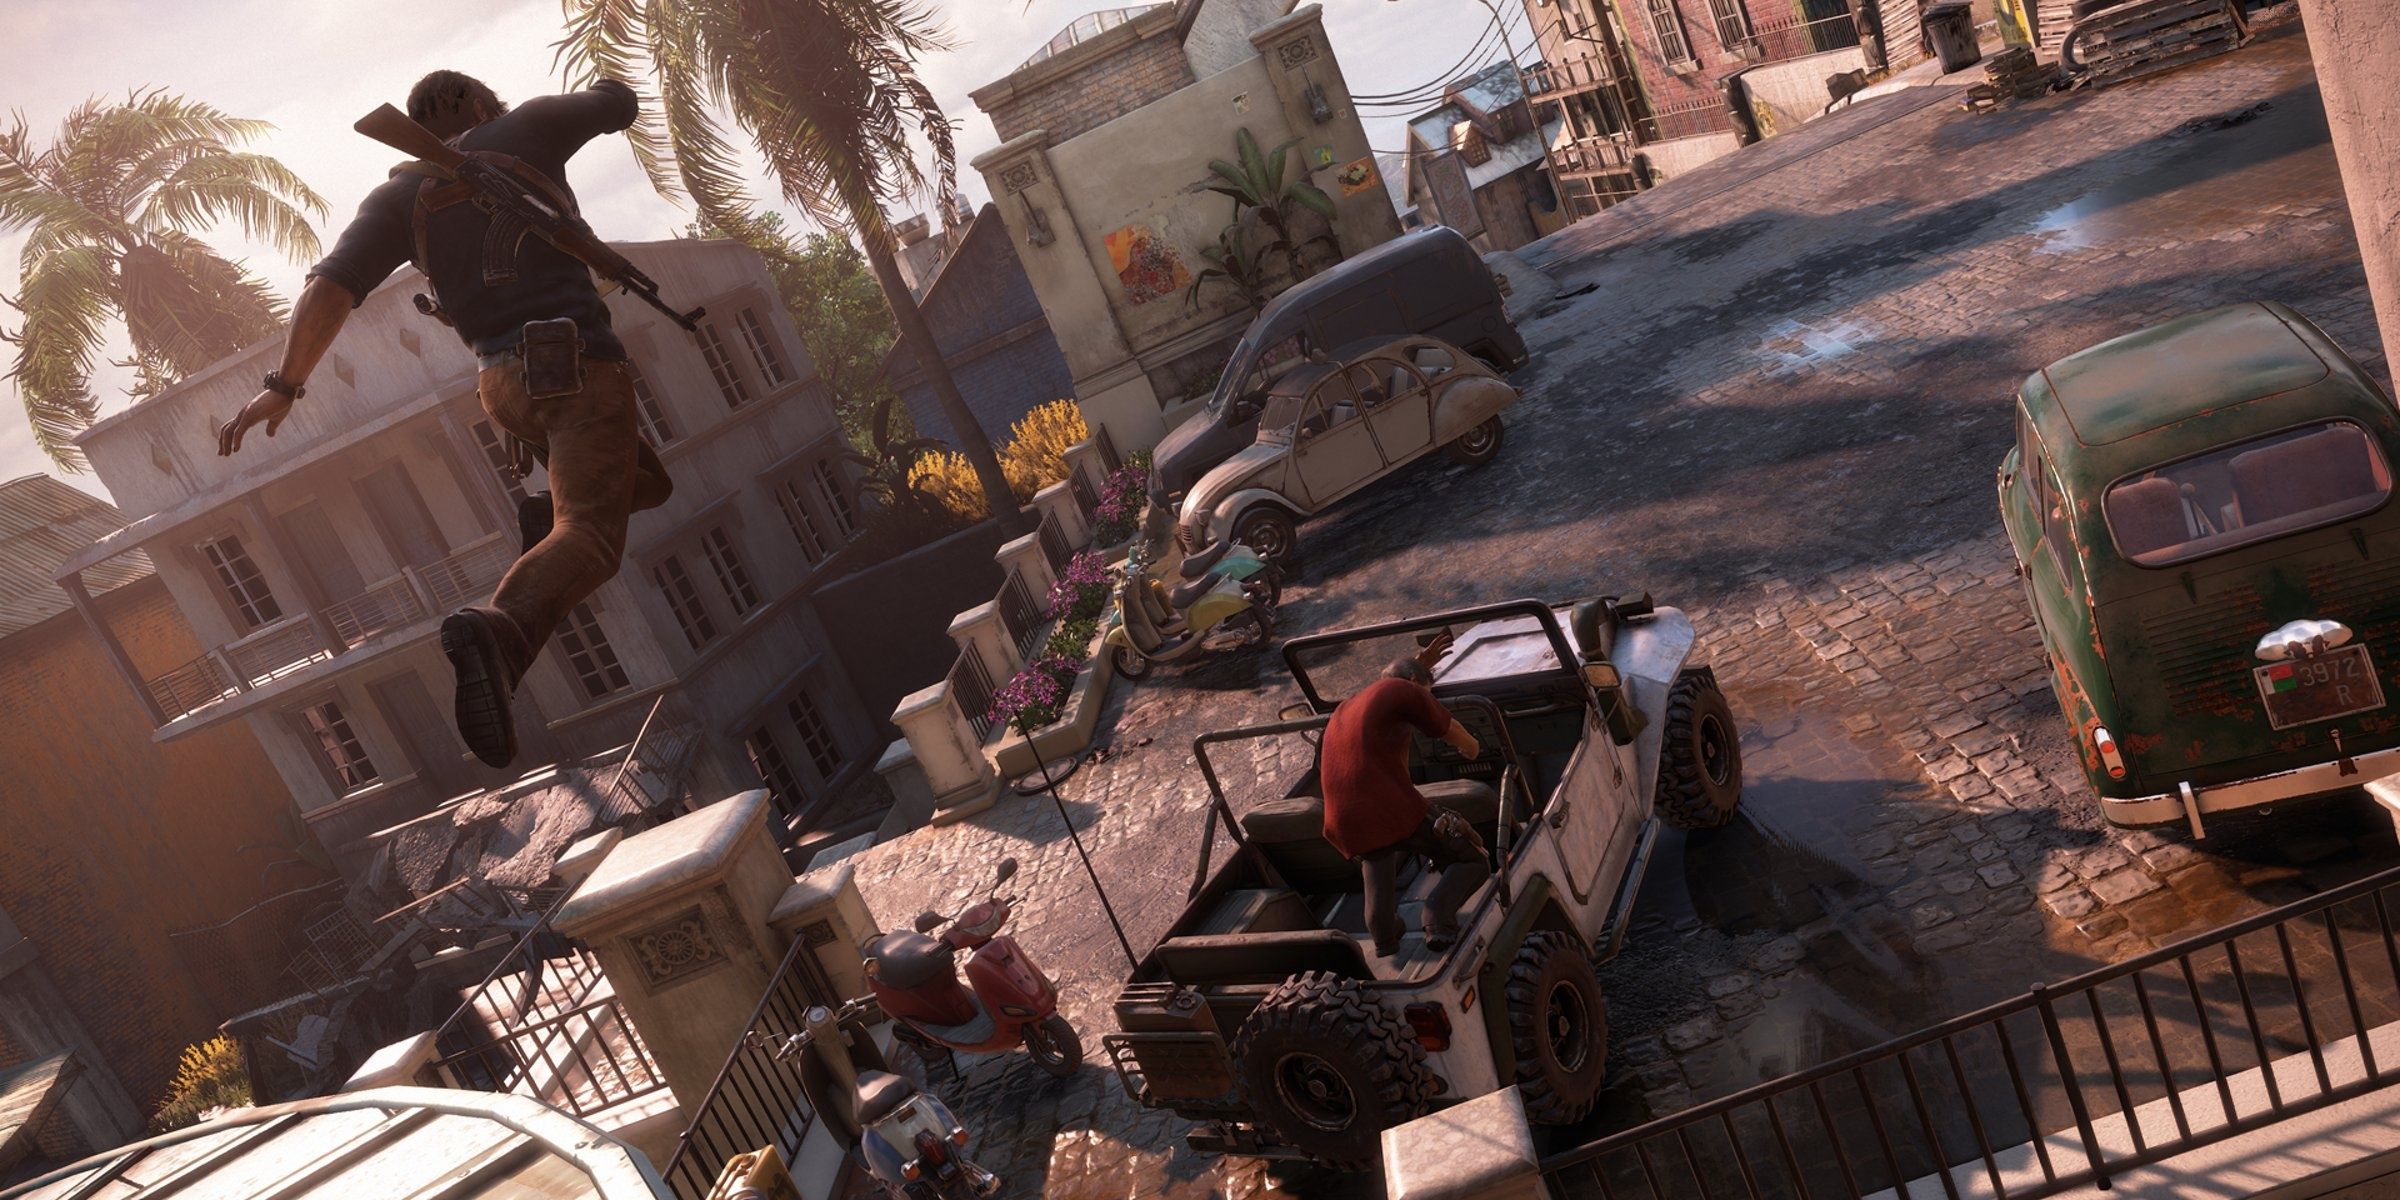 A screenshot showing Nate leaping onto a jeep in Uncharted 4: A Thief's End